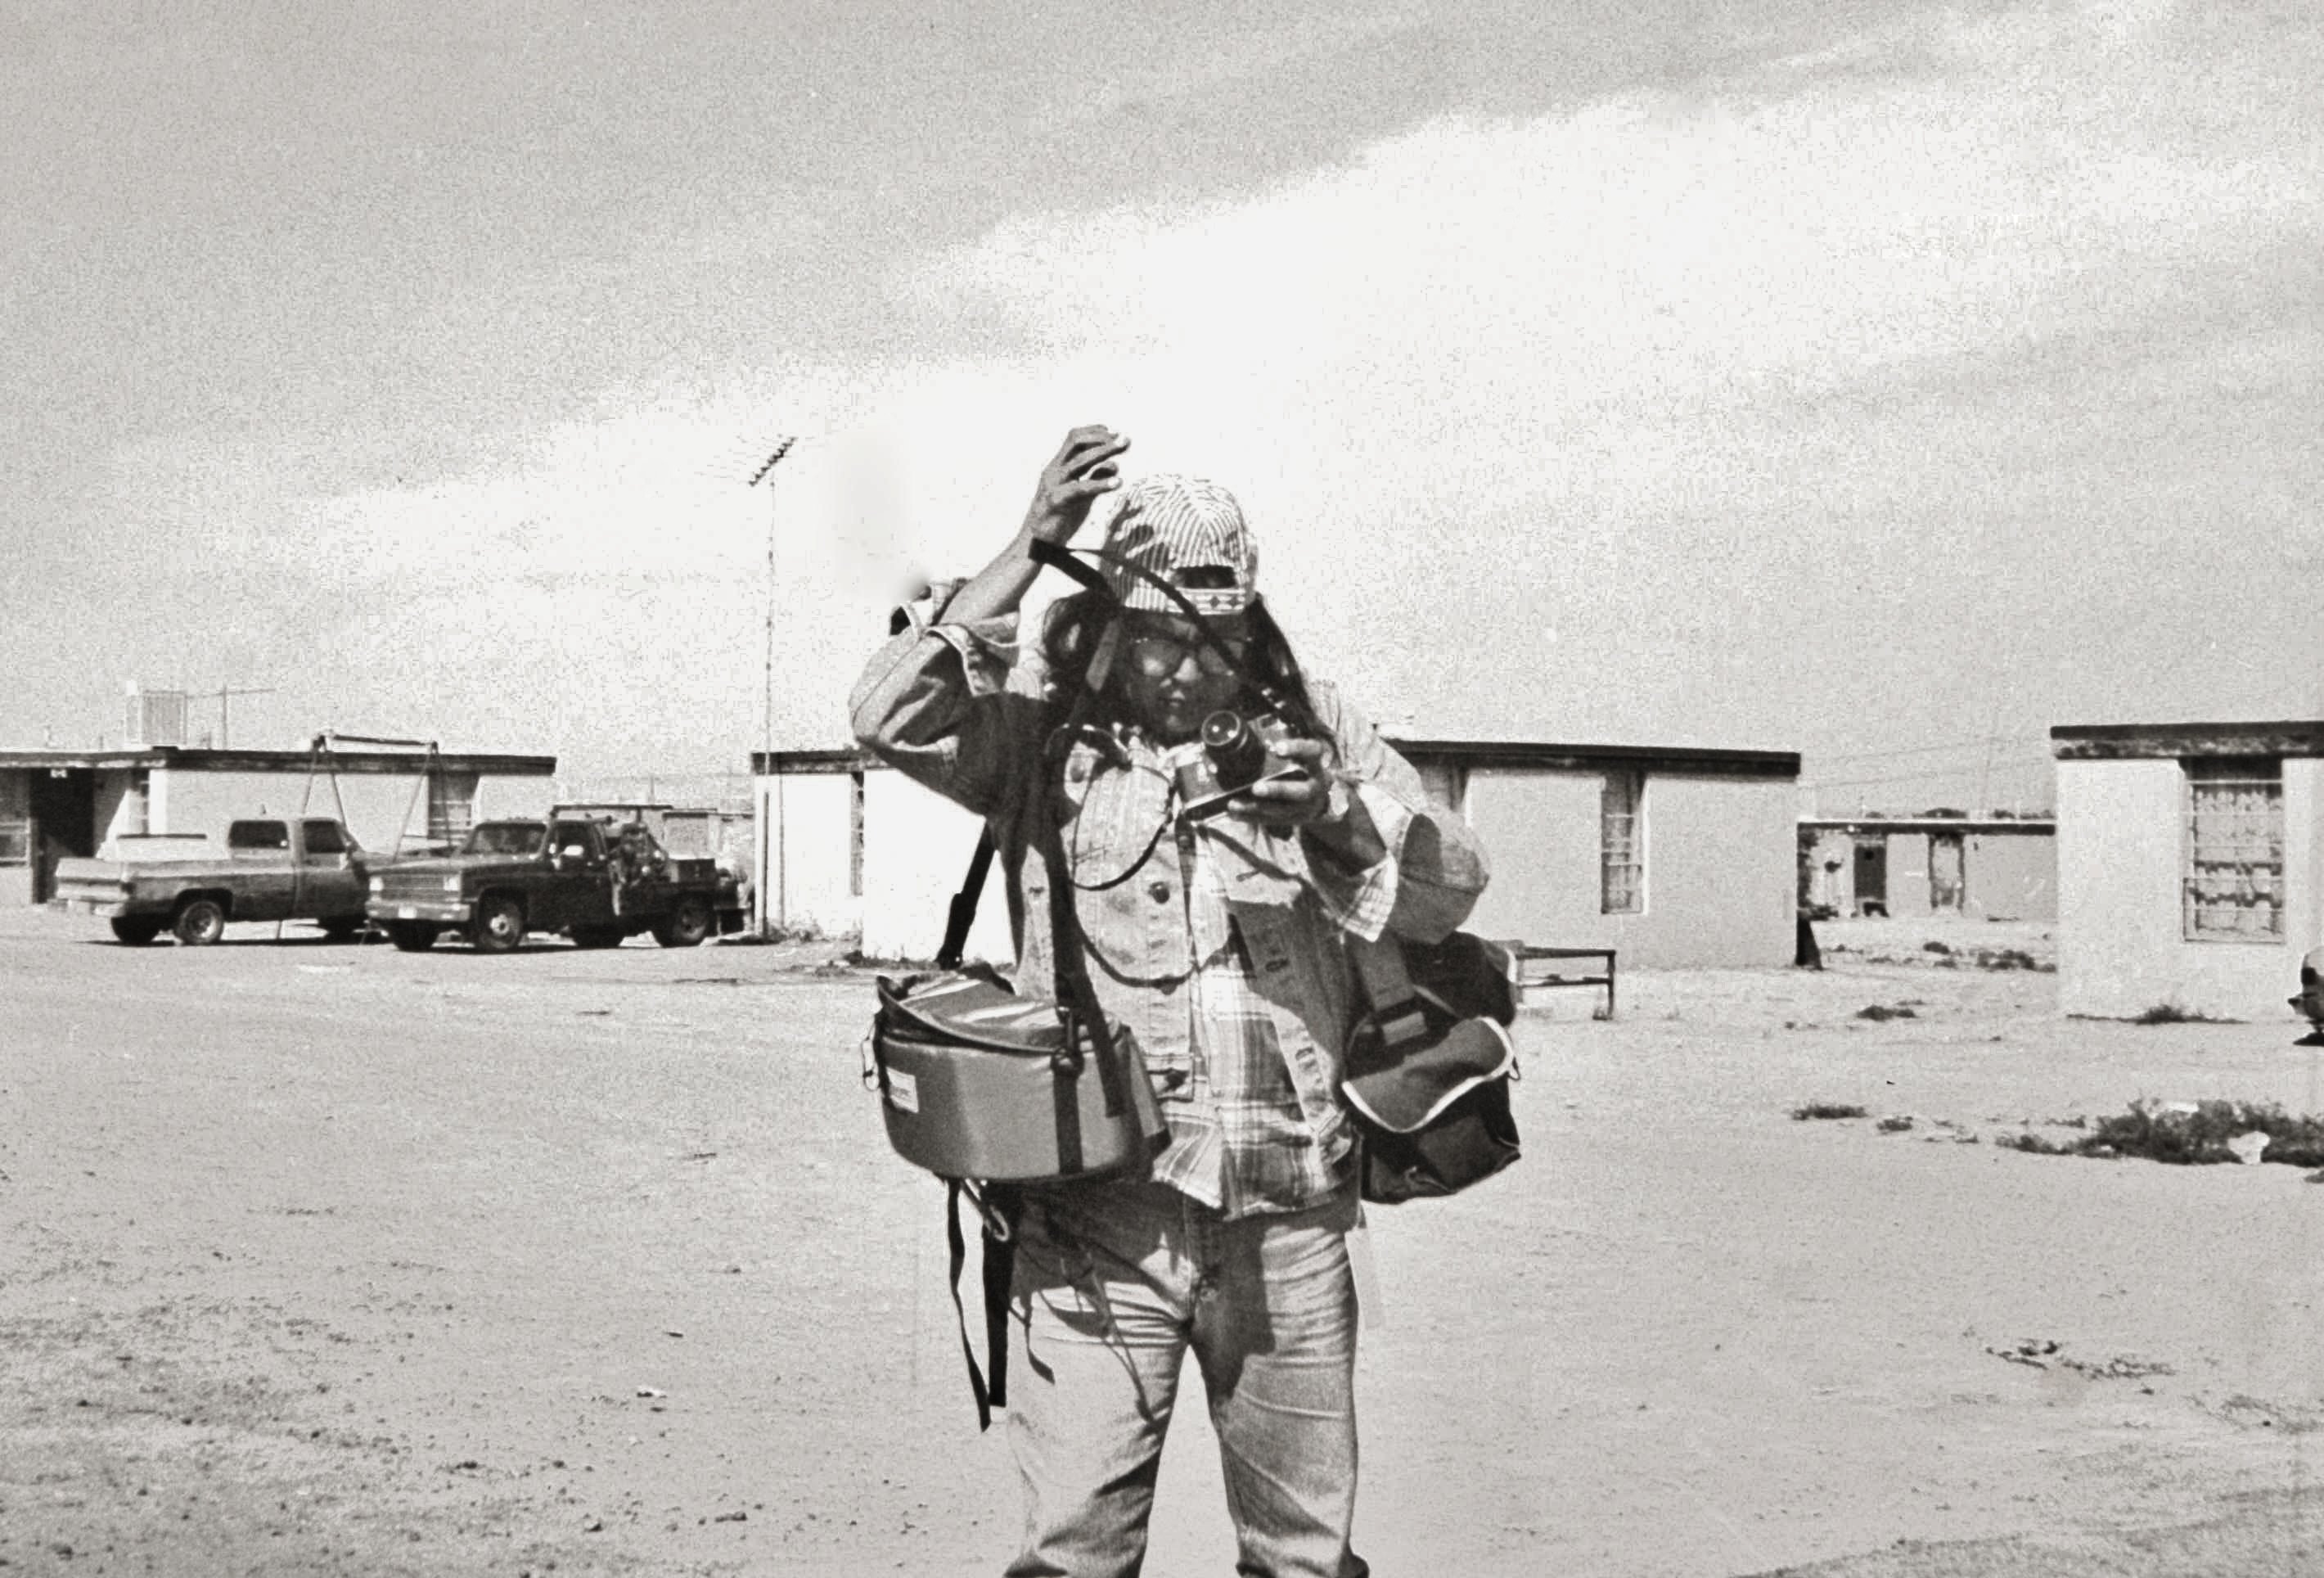 Photographer Gus among HUD housing made from uranium tailings on the Navajo Indian Reservation, Shiprock, New Mexico.